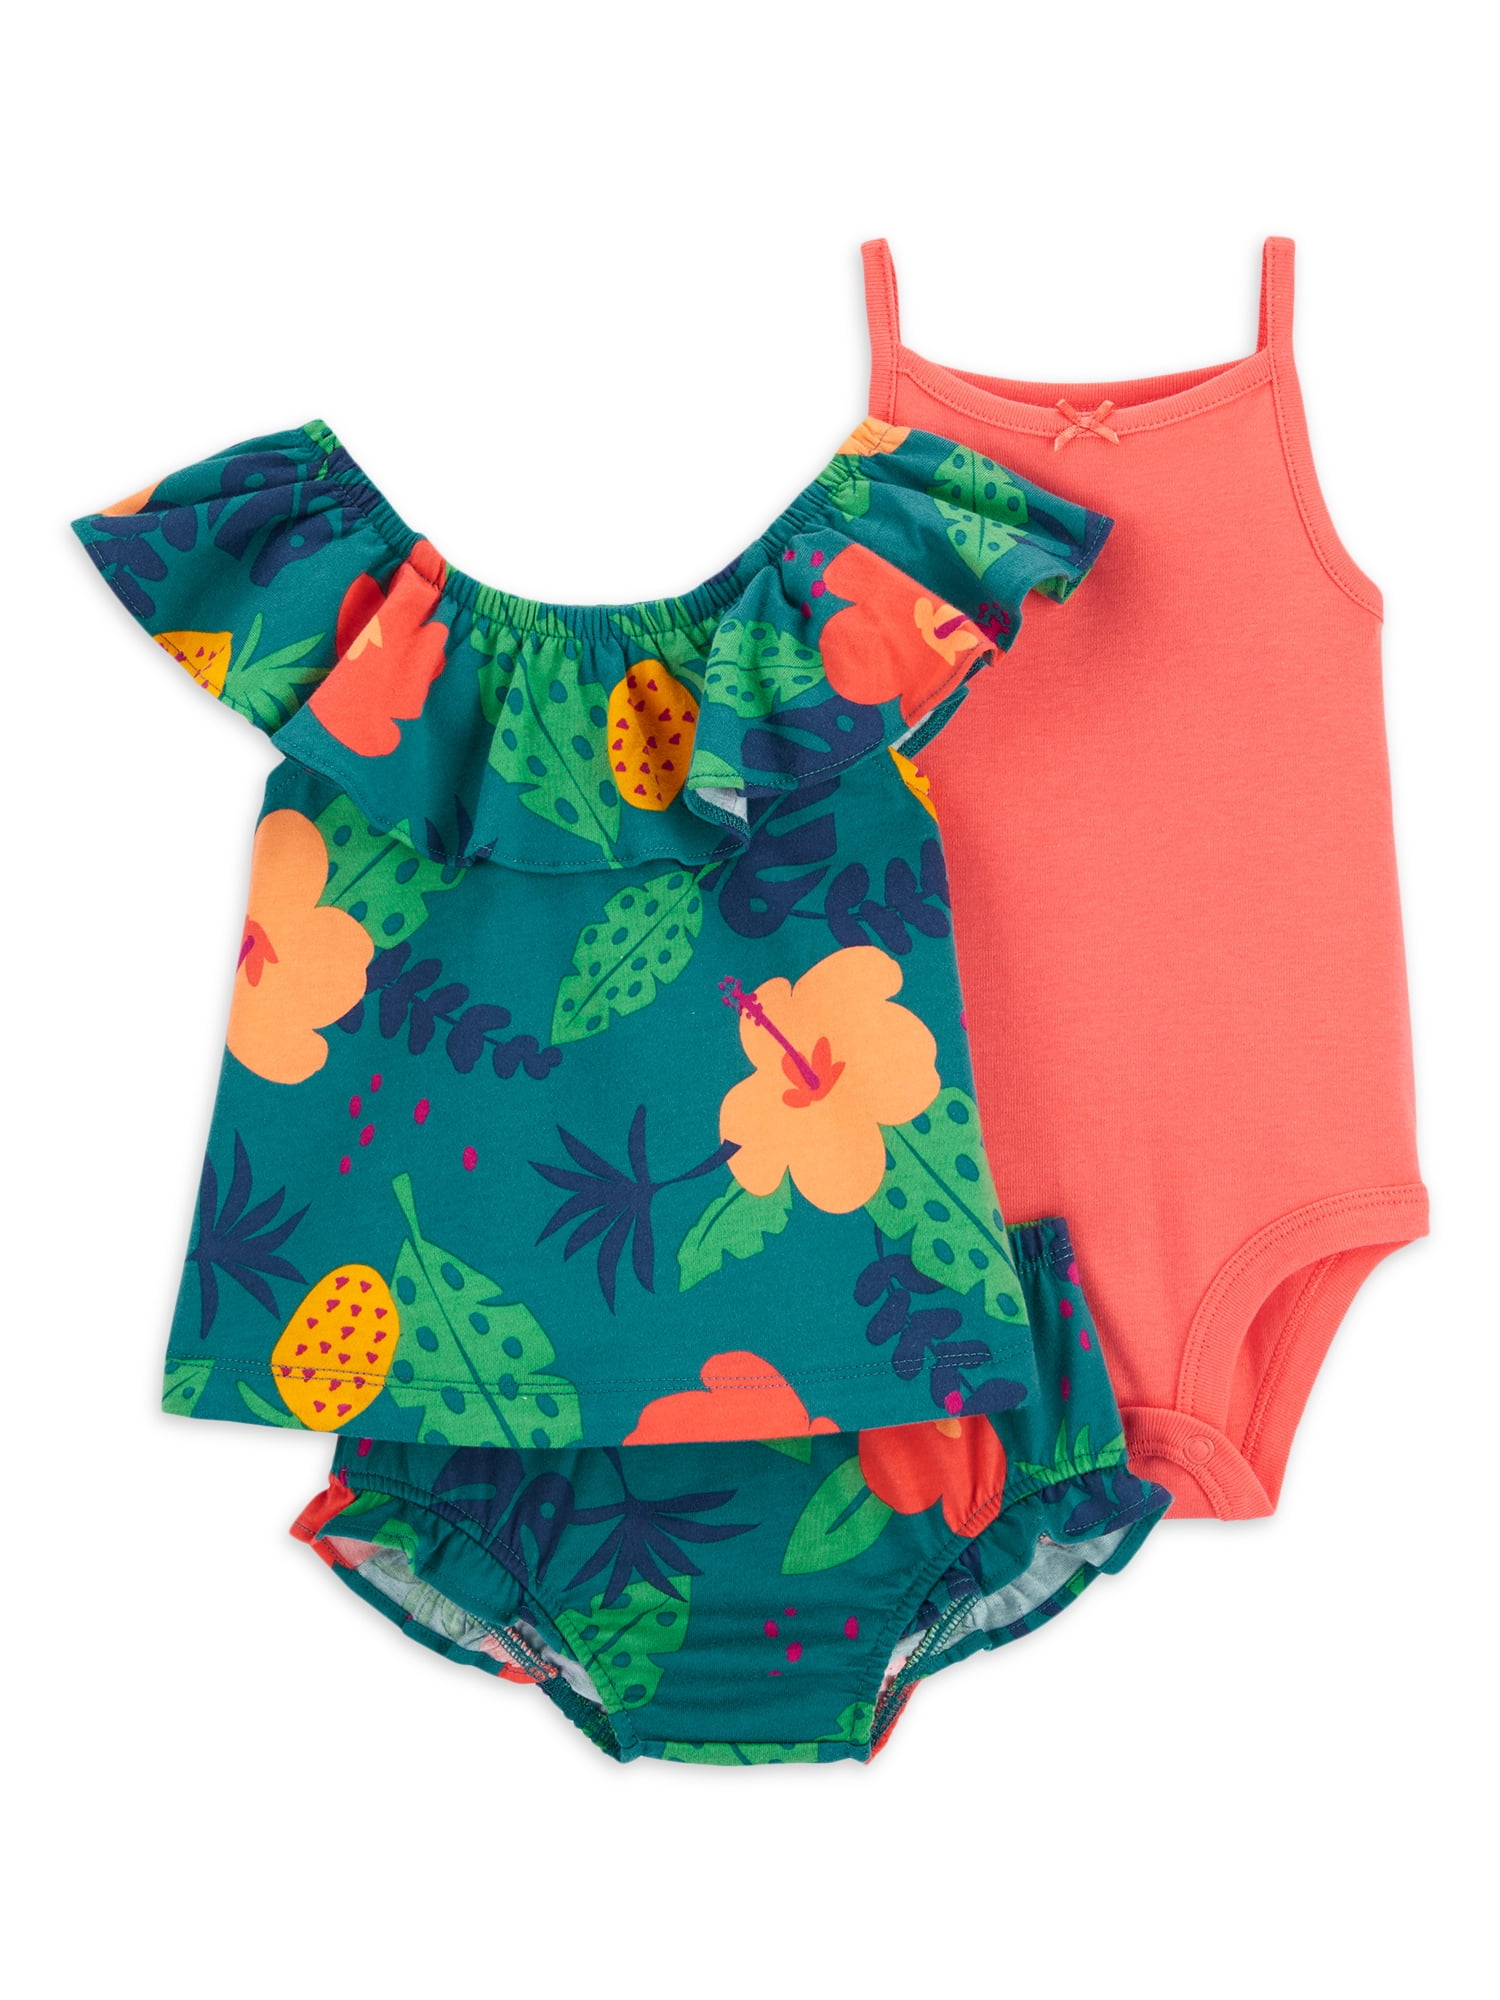 Carter's Child of Mine Set of 3 One-Pieces 0-3; 3-6;6-9 Mo Bodysuits 